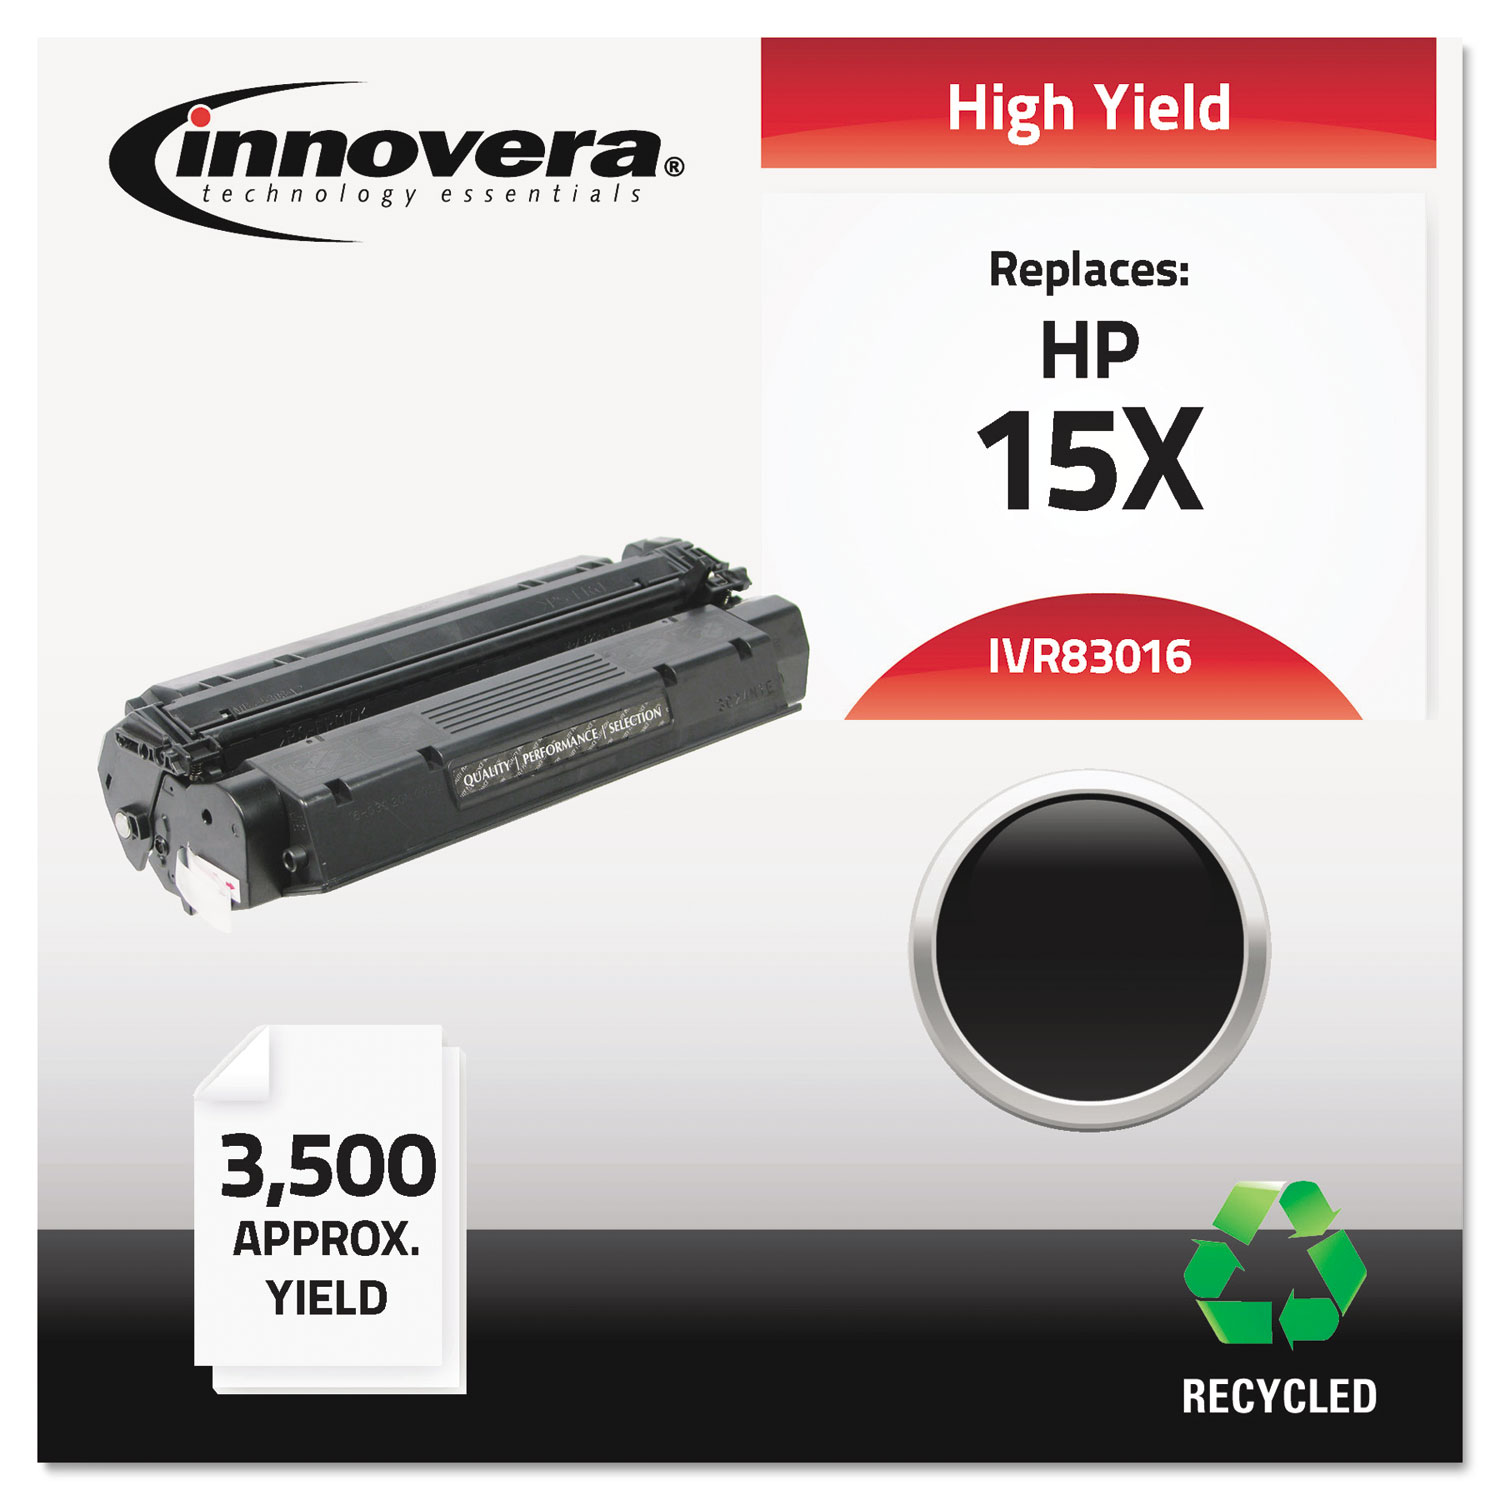 Remanufactured C7115X (15X) High-Yield Toner, 3500 Page-Yield, Black